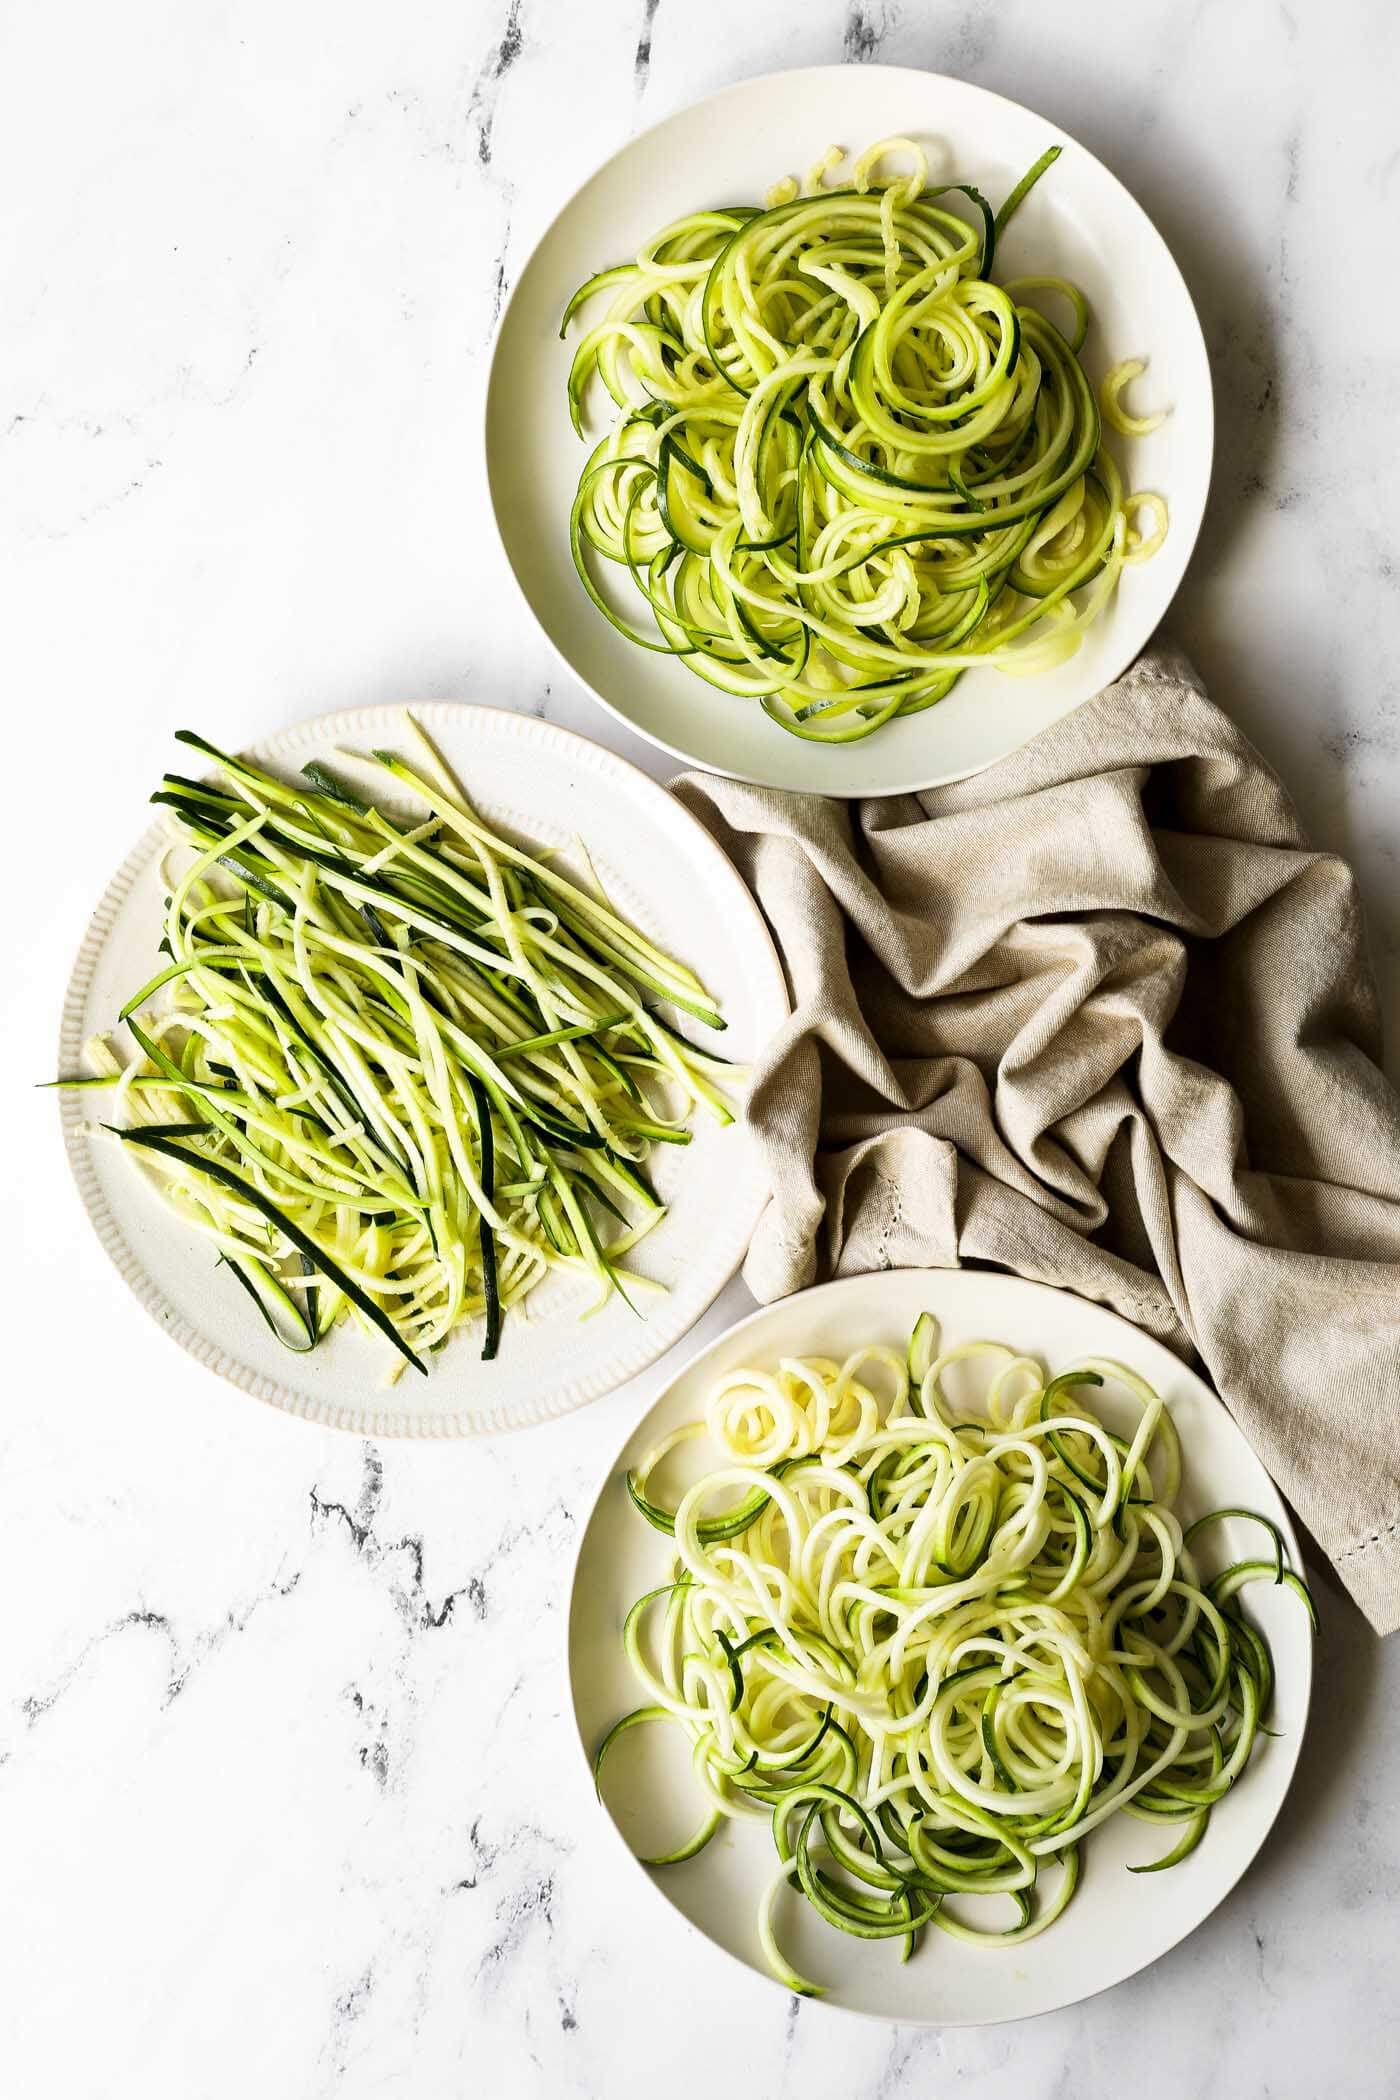 Zoodles: How to Cook and Avoid Watery, Soggy Zucchini Noodles - Real Simple Good